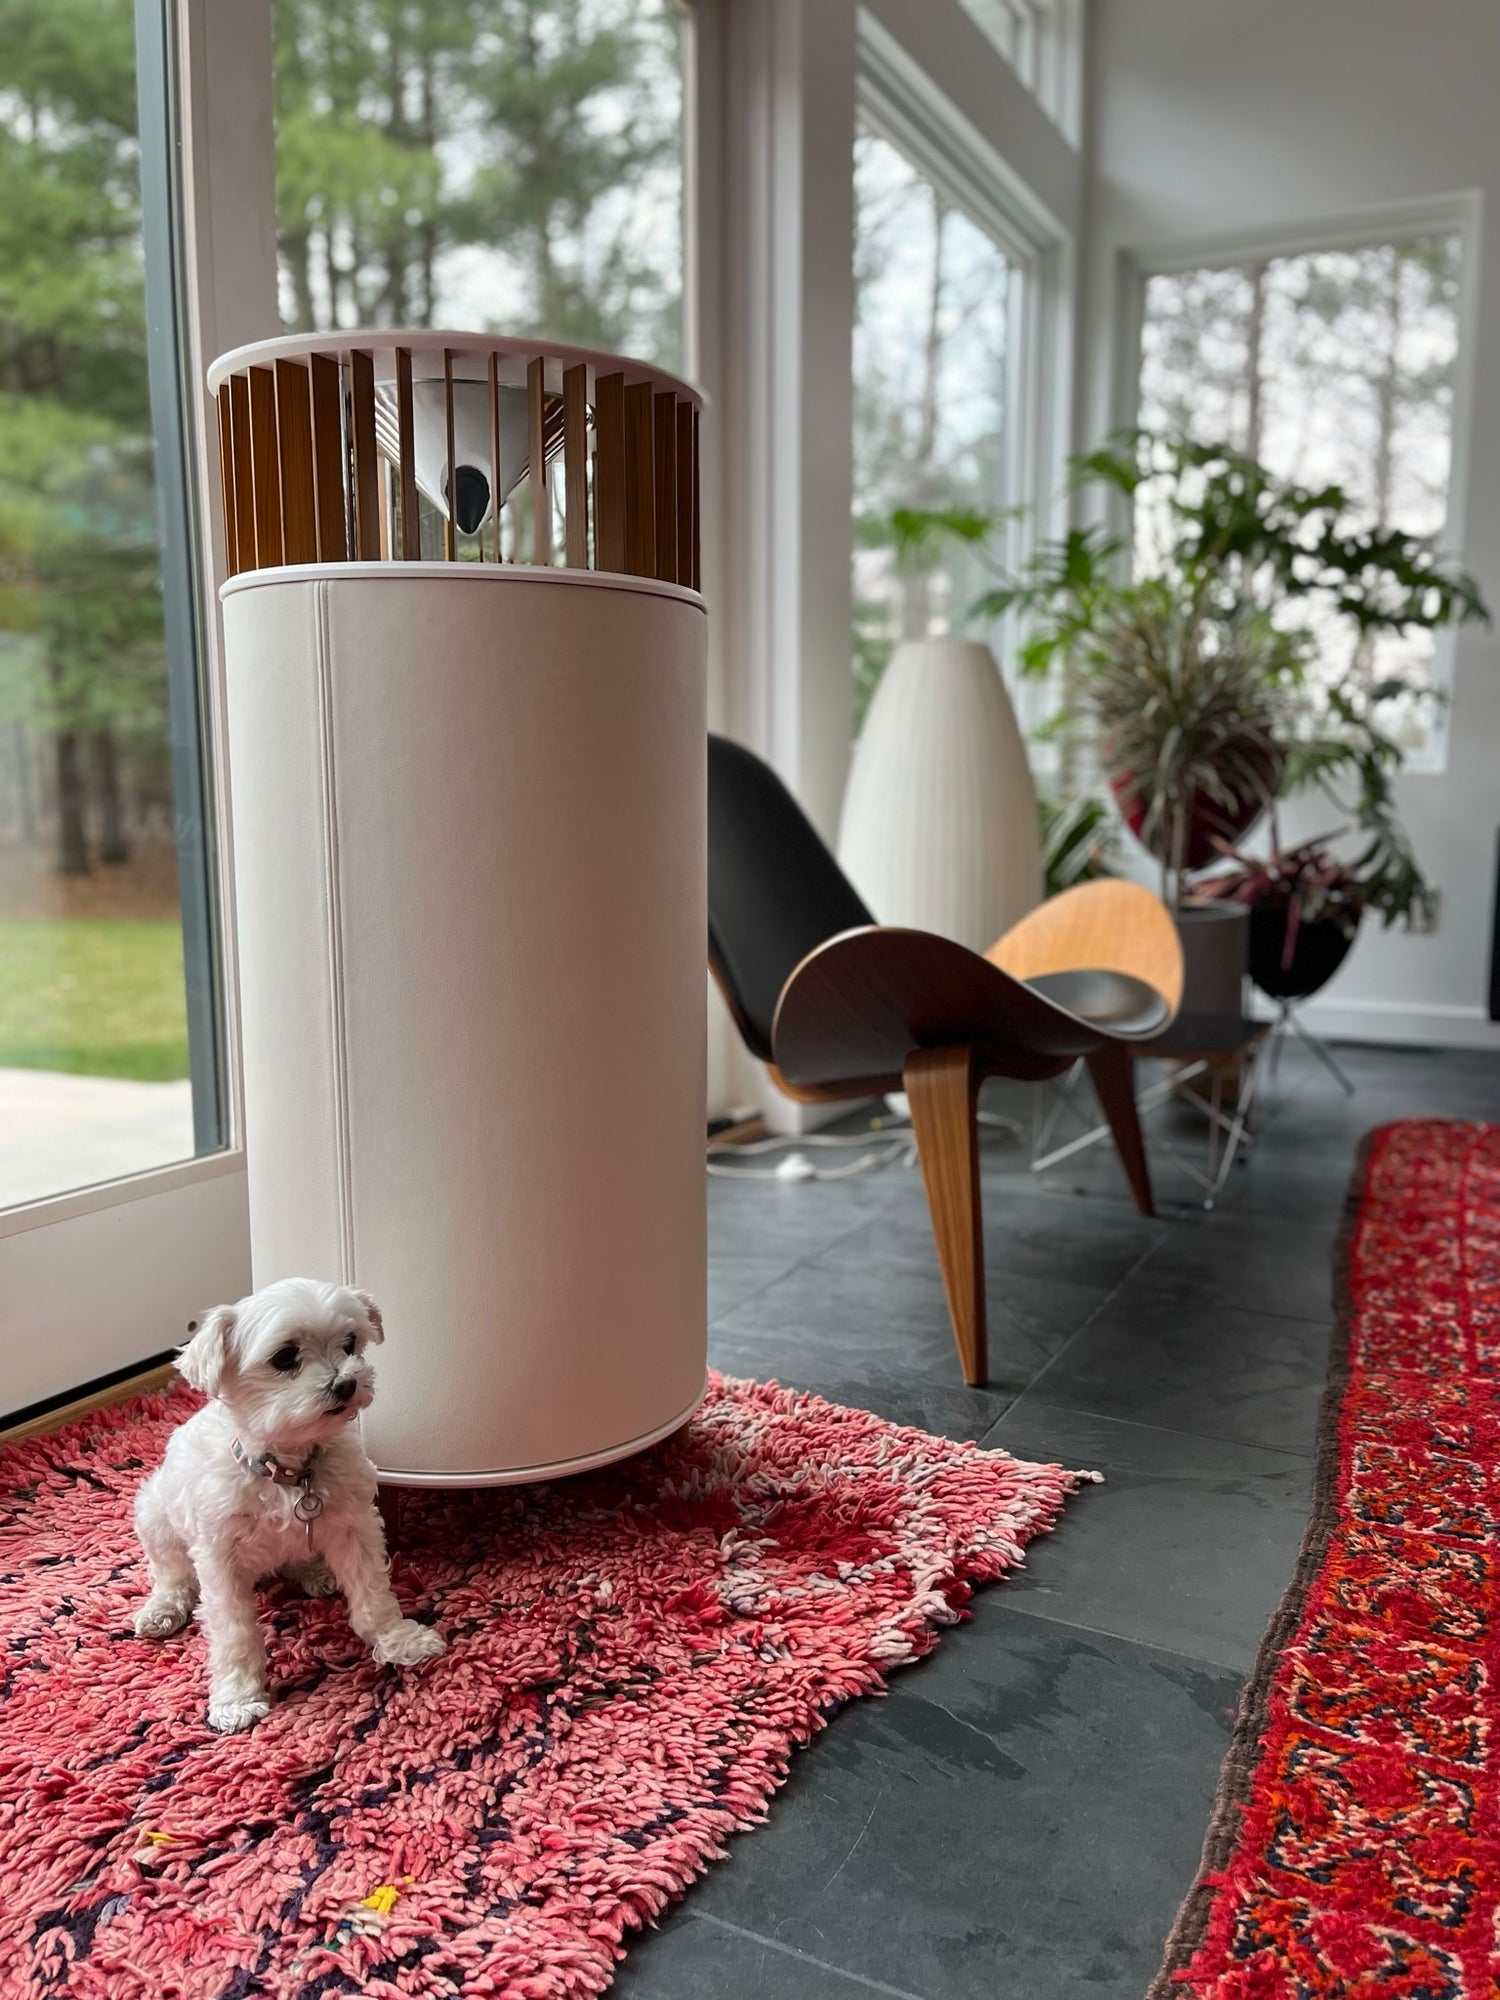 Phillips Design OH-16 mid-century modern home audio speakers with Coco the dog